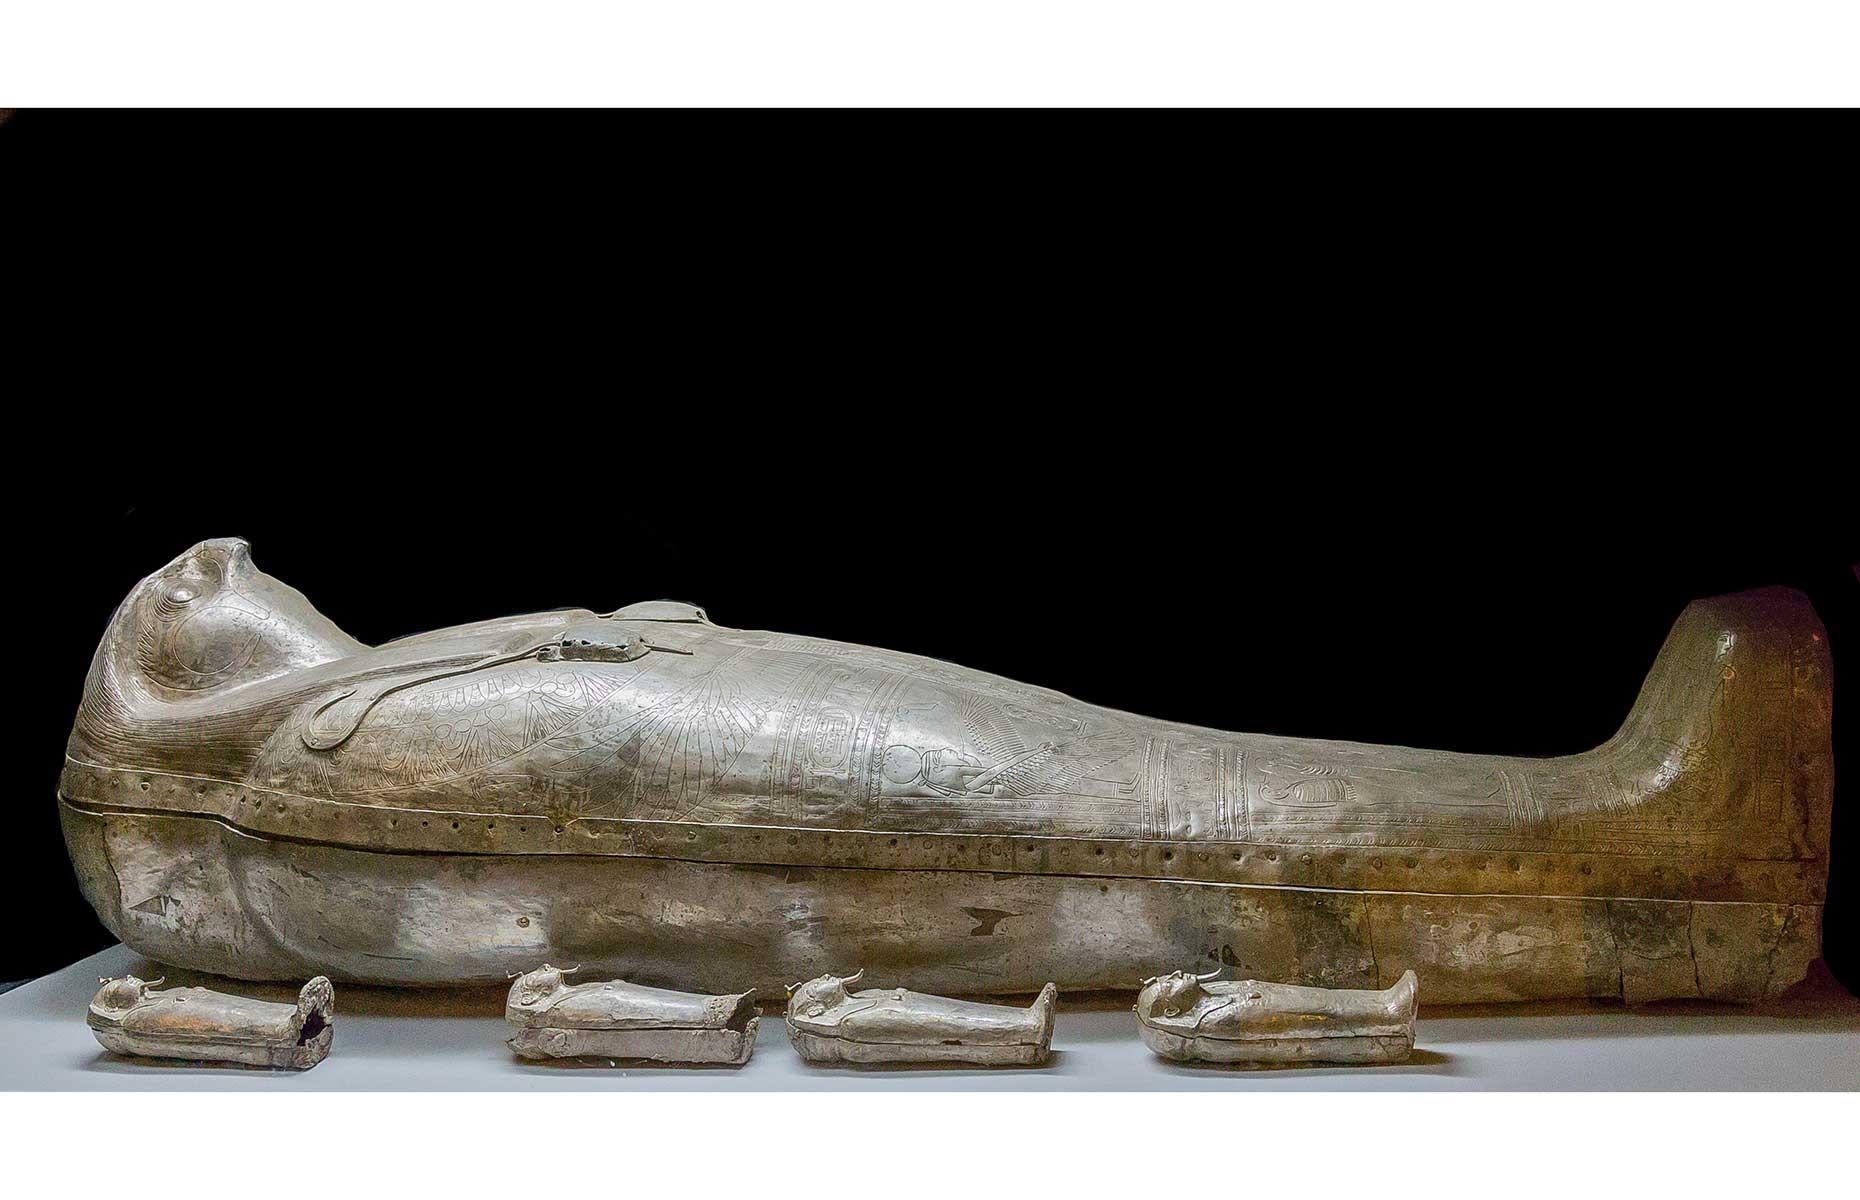 <p>This striking silver coffin is arguably the most famous of the Tanis Treasures. The priceless coffin contained the mummy of Shoshenq II, a 22nd-dynasty pharaoh unknown until Montet's discovery. Unusually, the coffin uses a falcon instead of the king's head, and the miniatures surrounding his coffin contained his organs – a stark contrast to the canopic jars more commonly used.</p>  <p><a href="https://www.loveexploring.com/galleries/155662/the-secrets-and-mysteries-of-stonehenge?page=1"><strong>Discover the secrets of Stonehenge</strong></a></p>